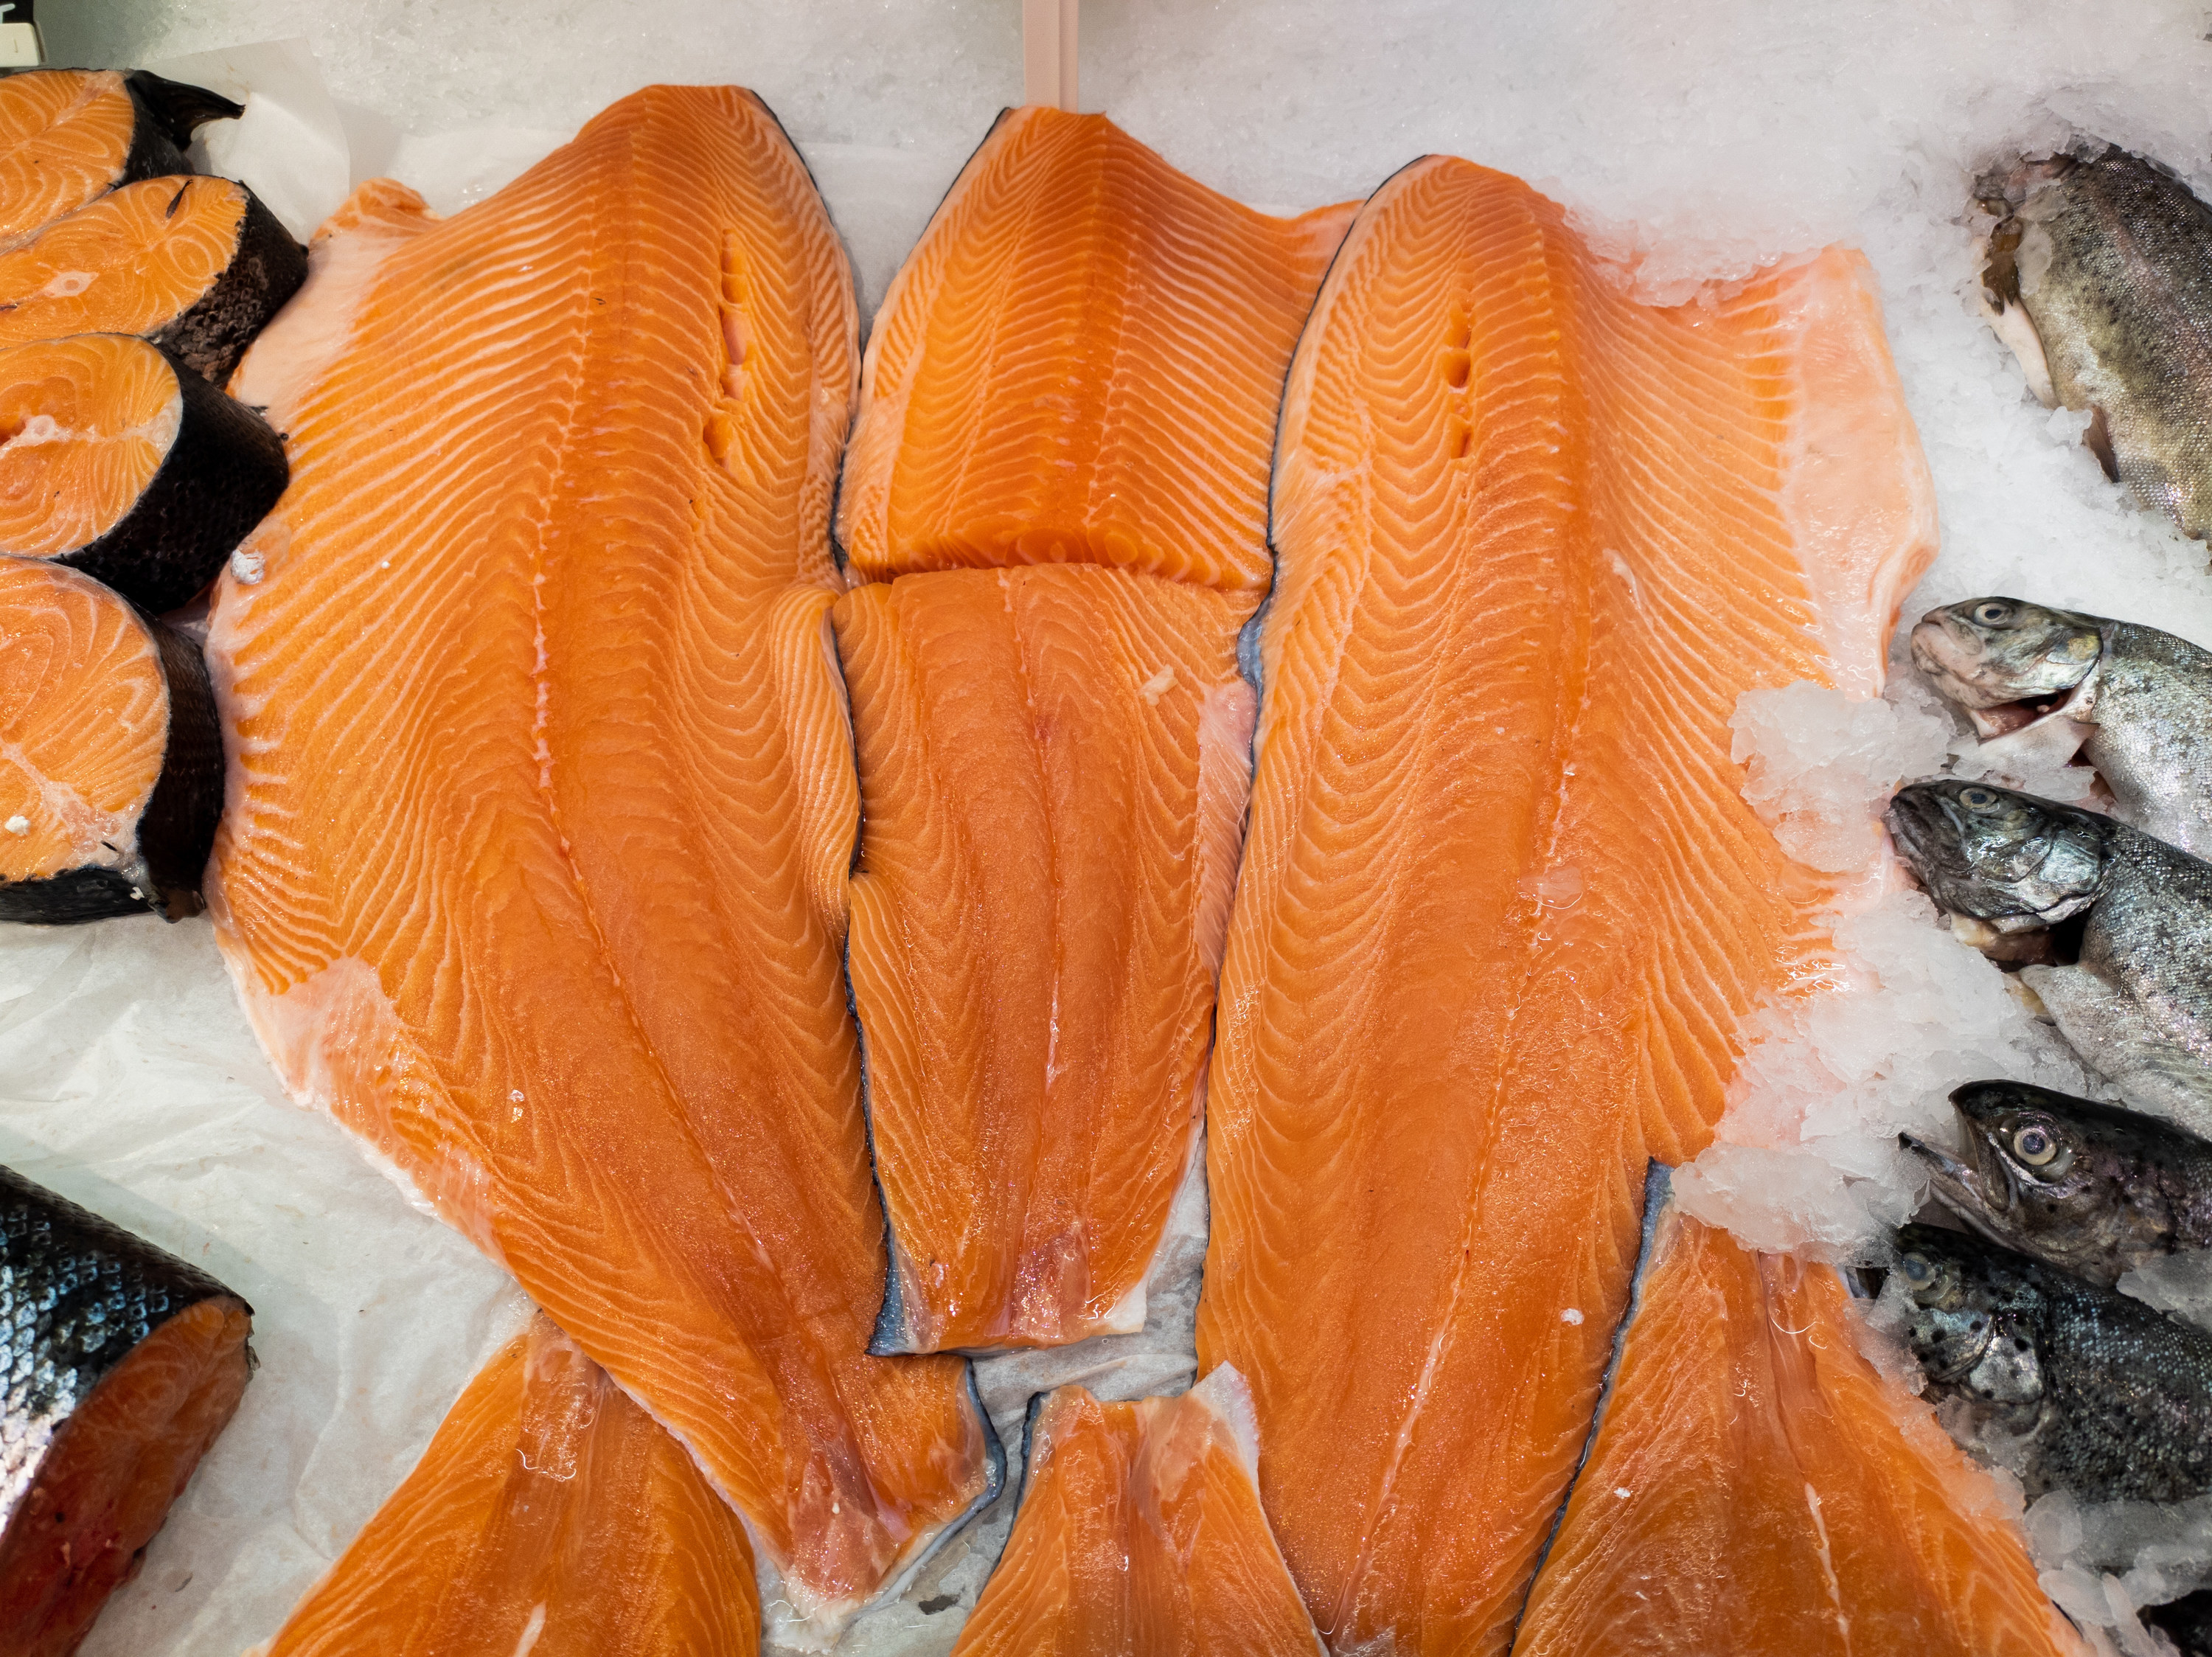 Raw salmon on ice at a fish counter